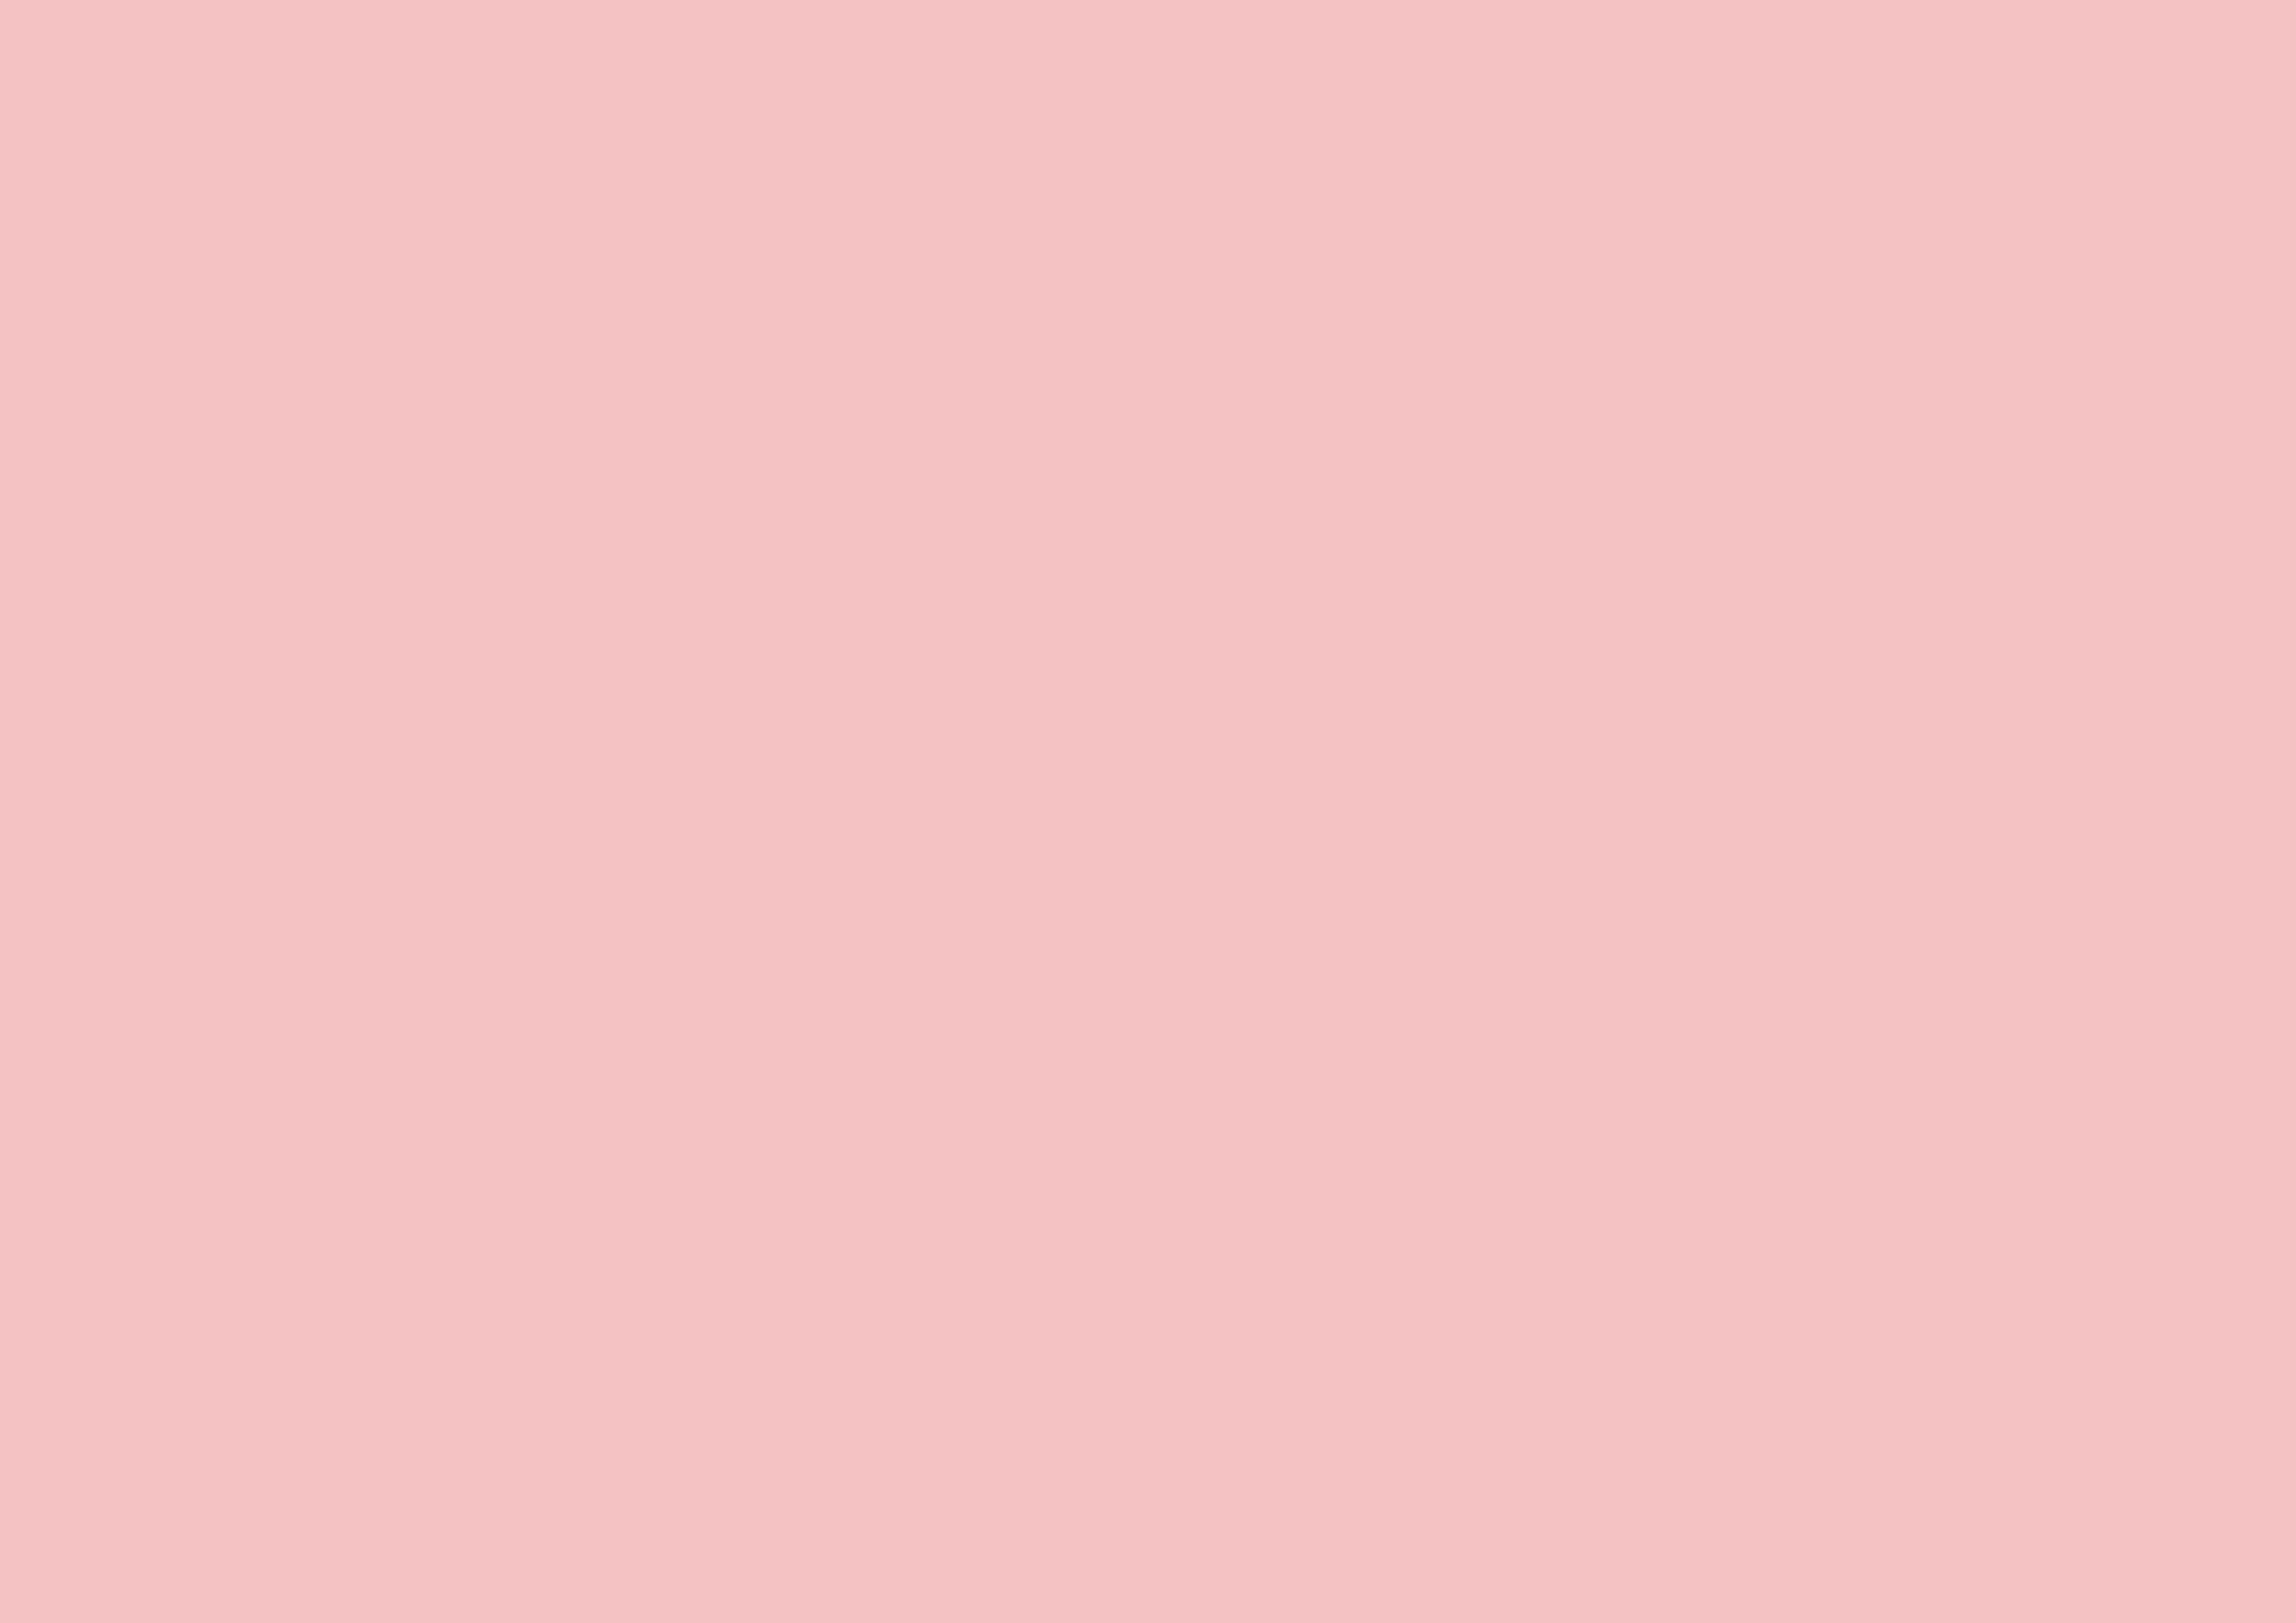 3508x2480 Baby Pink Solid Color Background